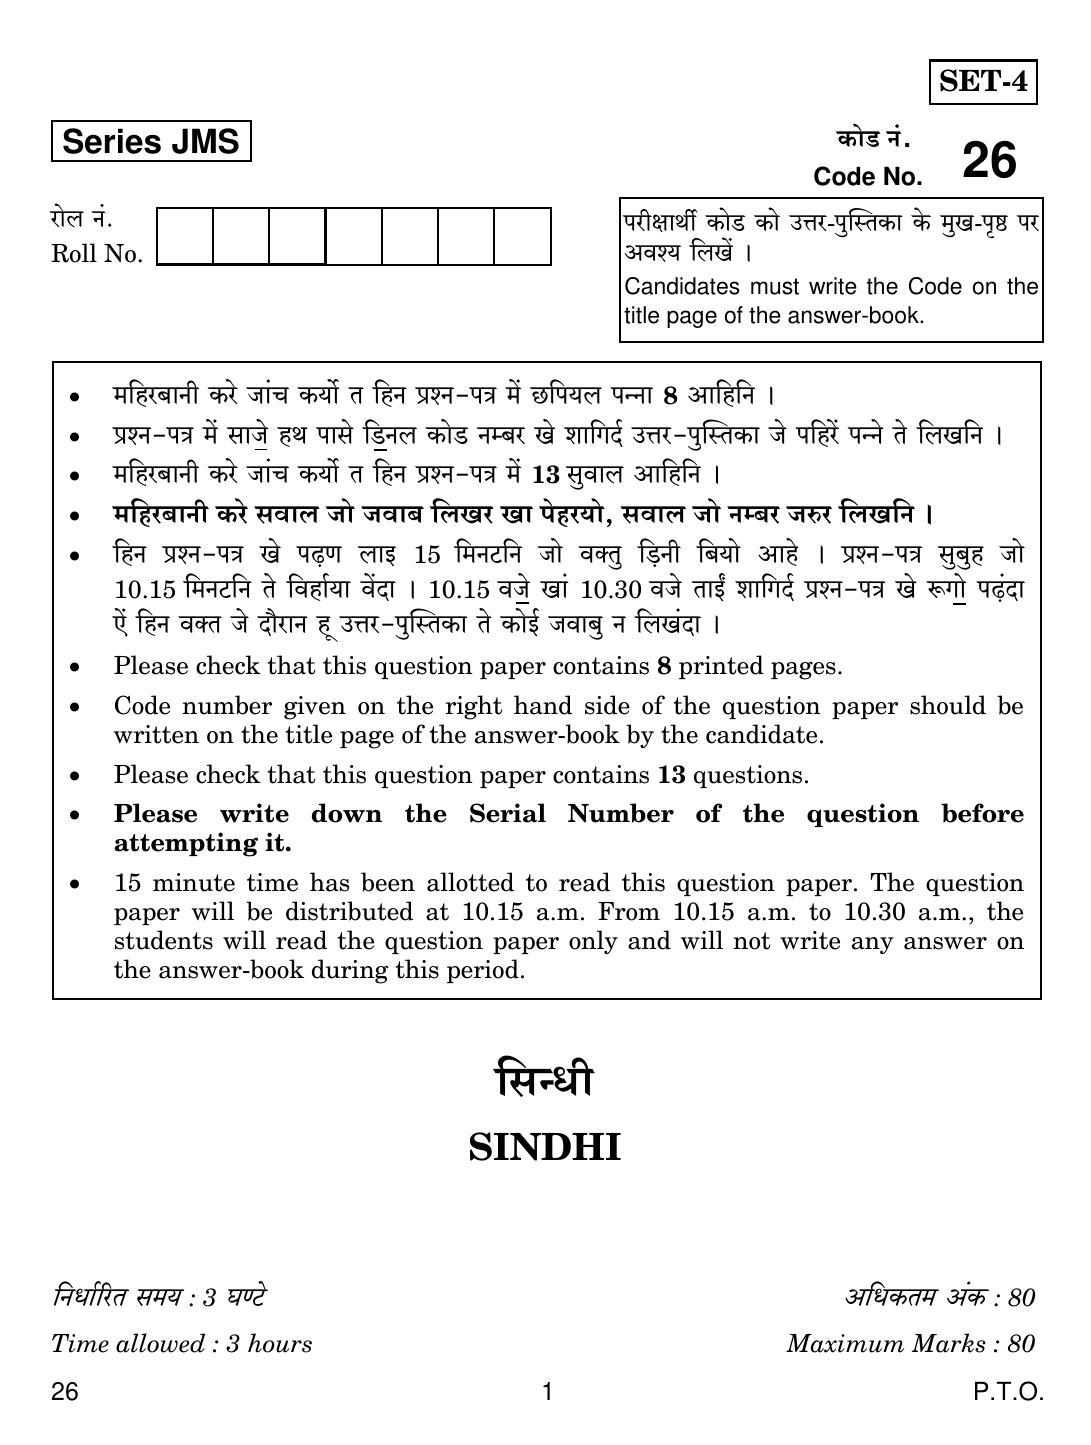 CBSE Class 10 26 SINDHI 2019 Question Paper - Page 1